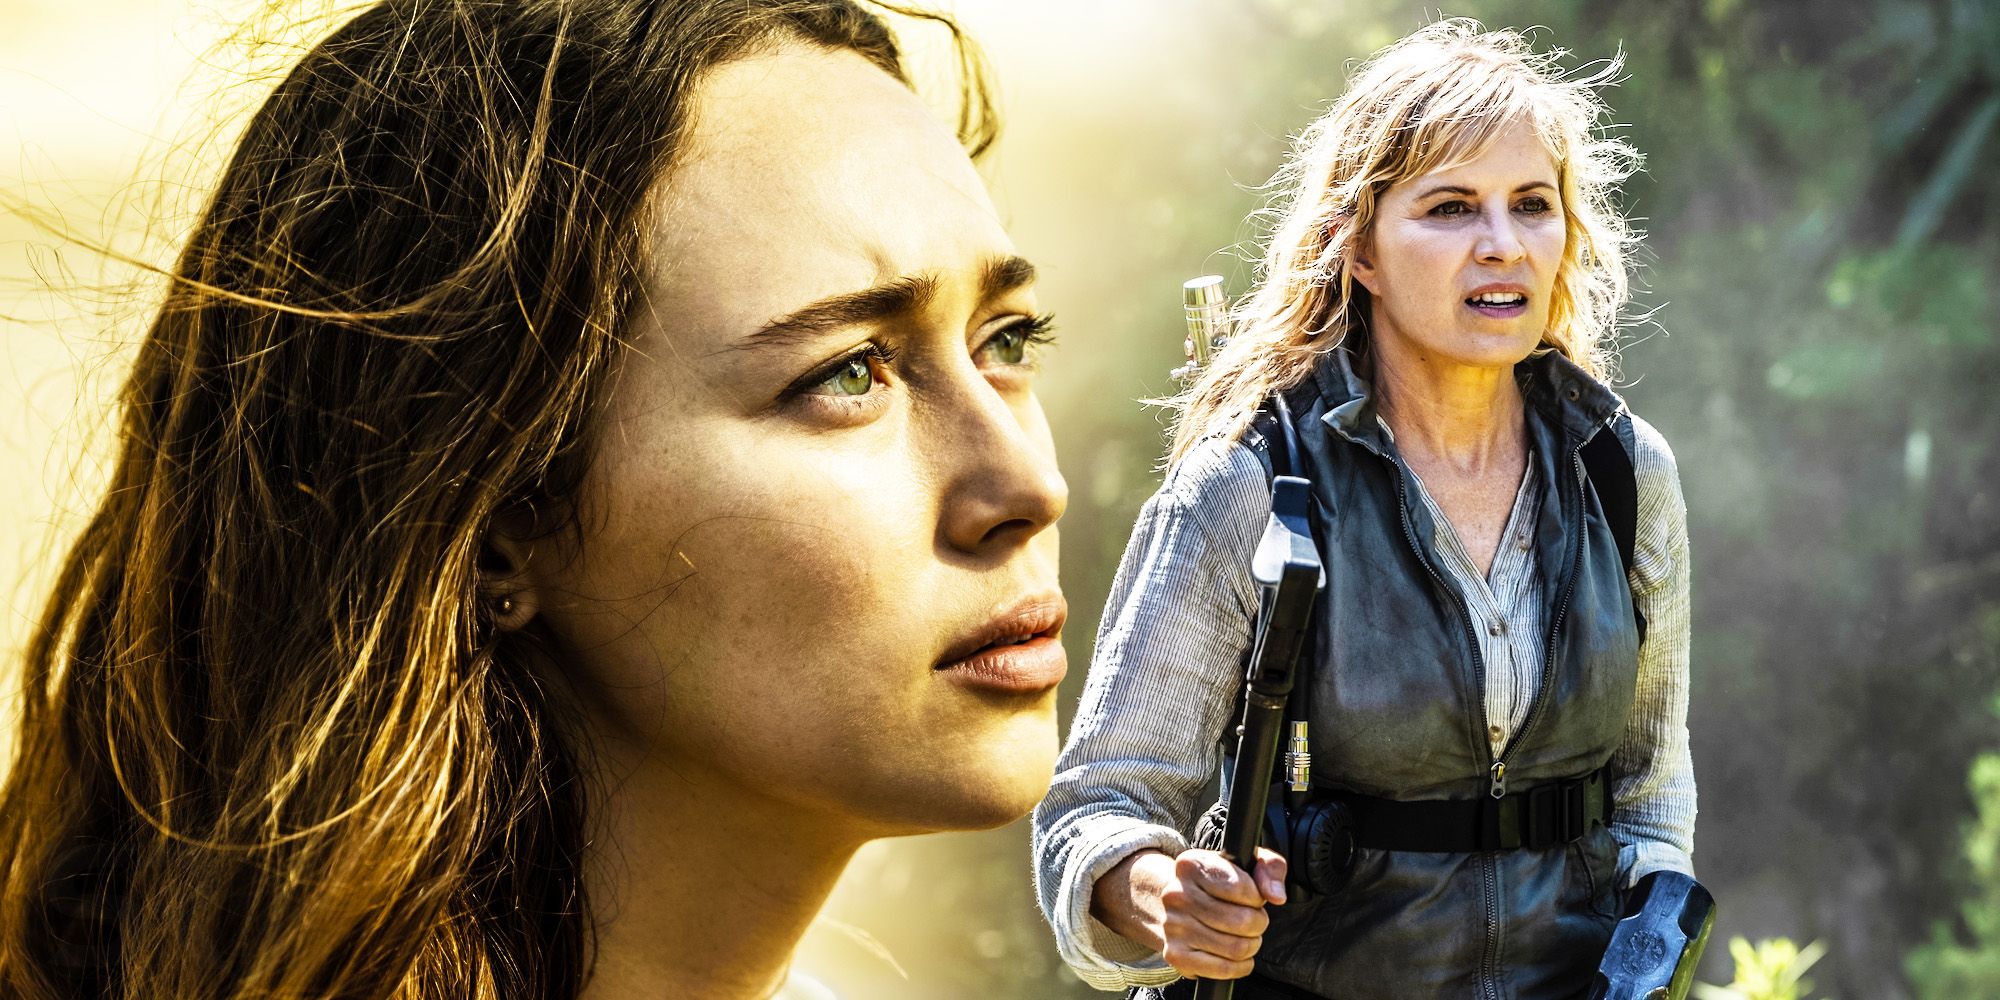 Fear The Walking Dead Season 8 Has To Bring Back Alicia Now, Right?